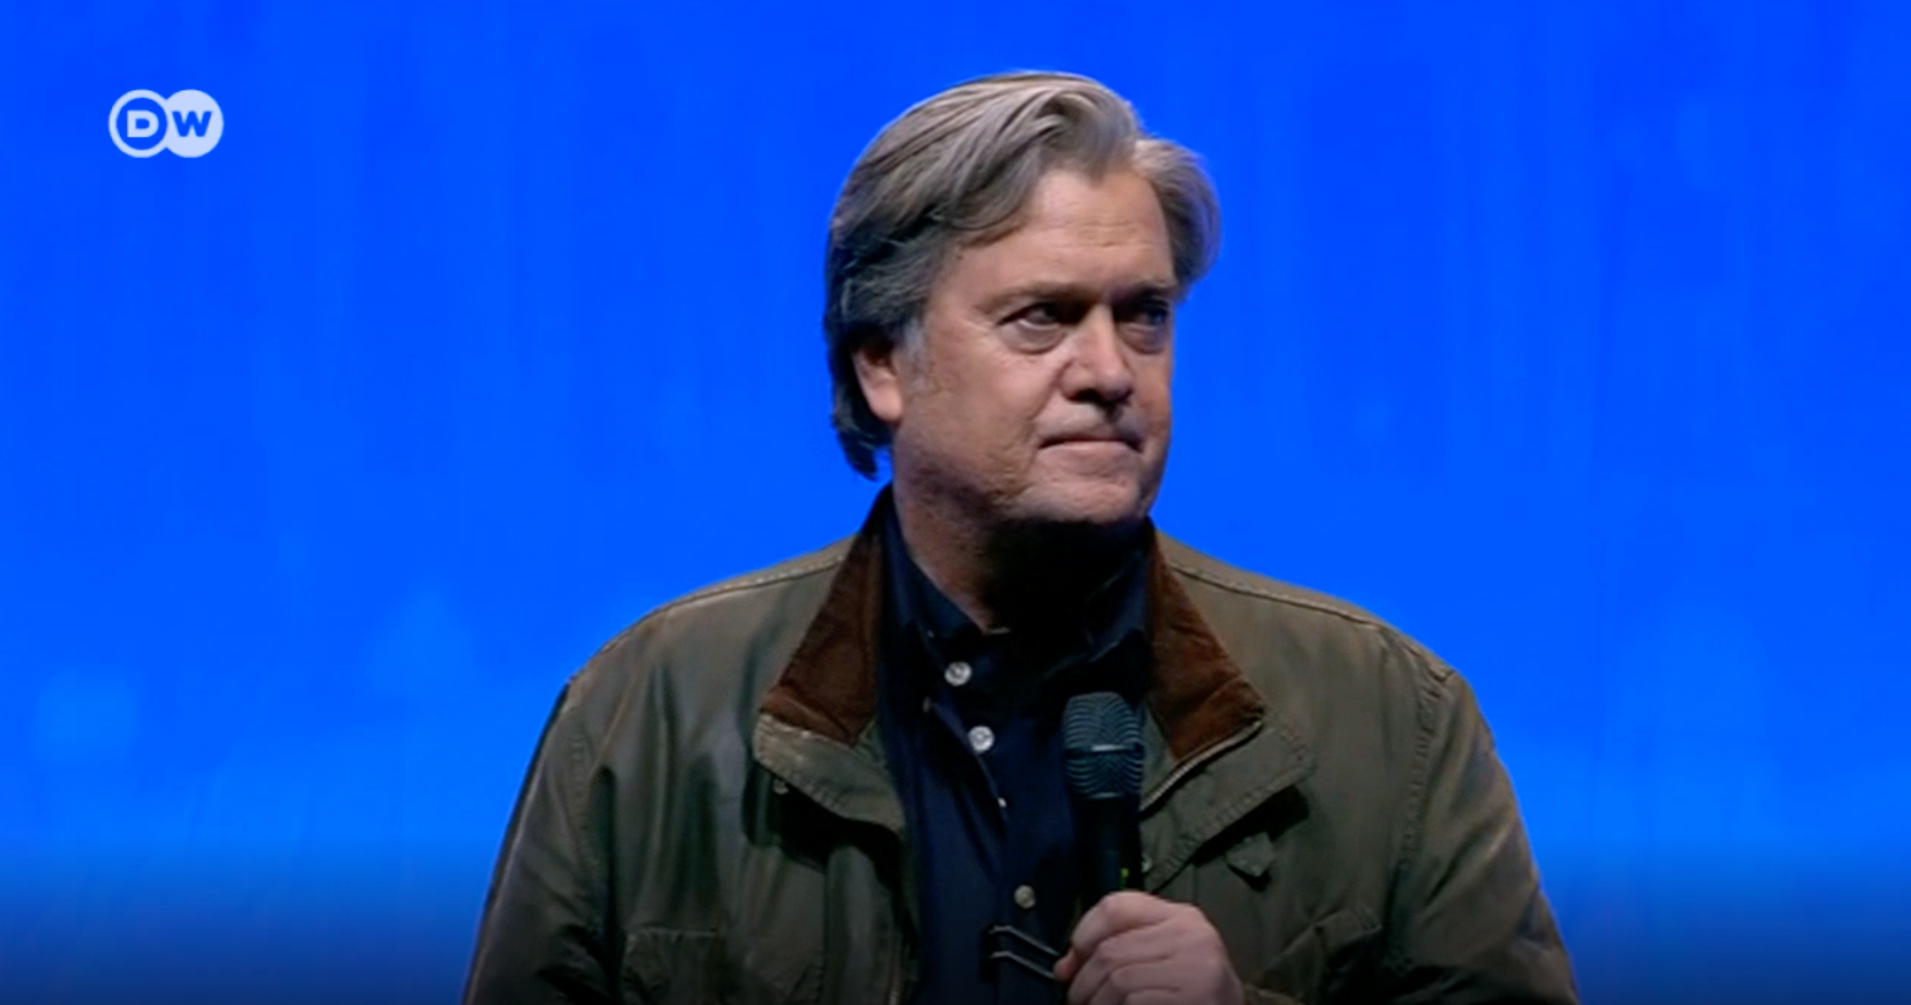 Steve Bannon addresses the delegates of the Front National’s party convention in Lille in March 2018.